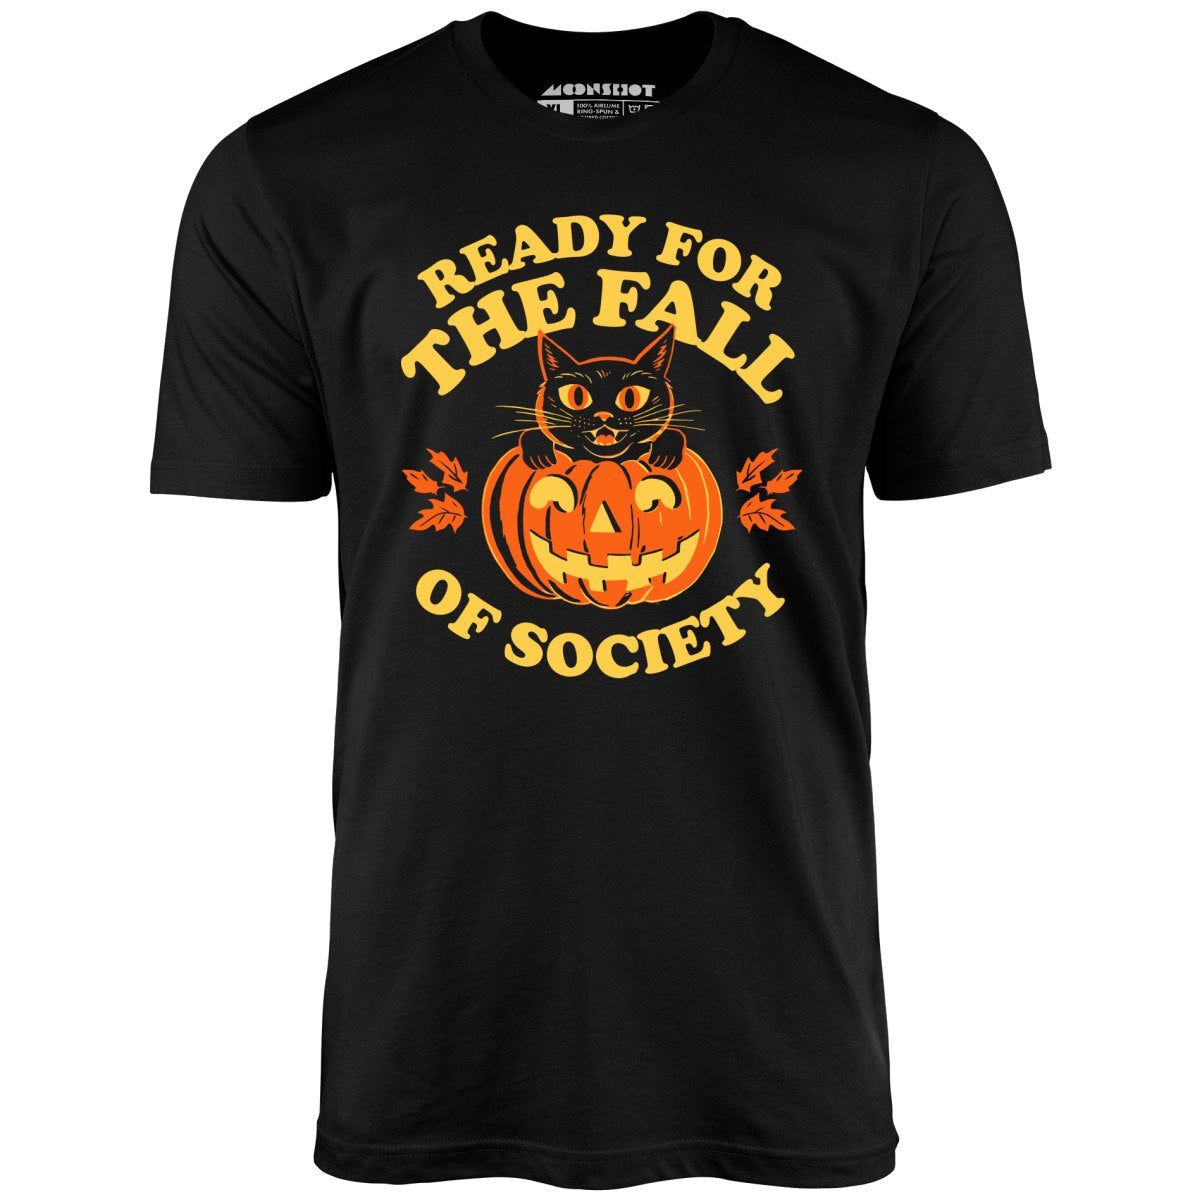 Ready For The Fall of Society - Unisex T-Shirt